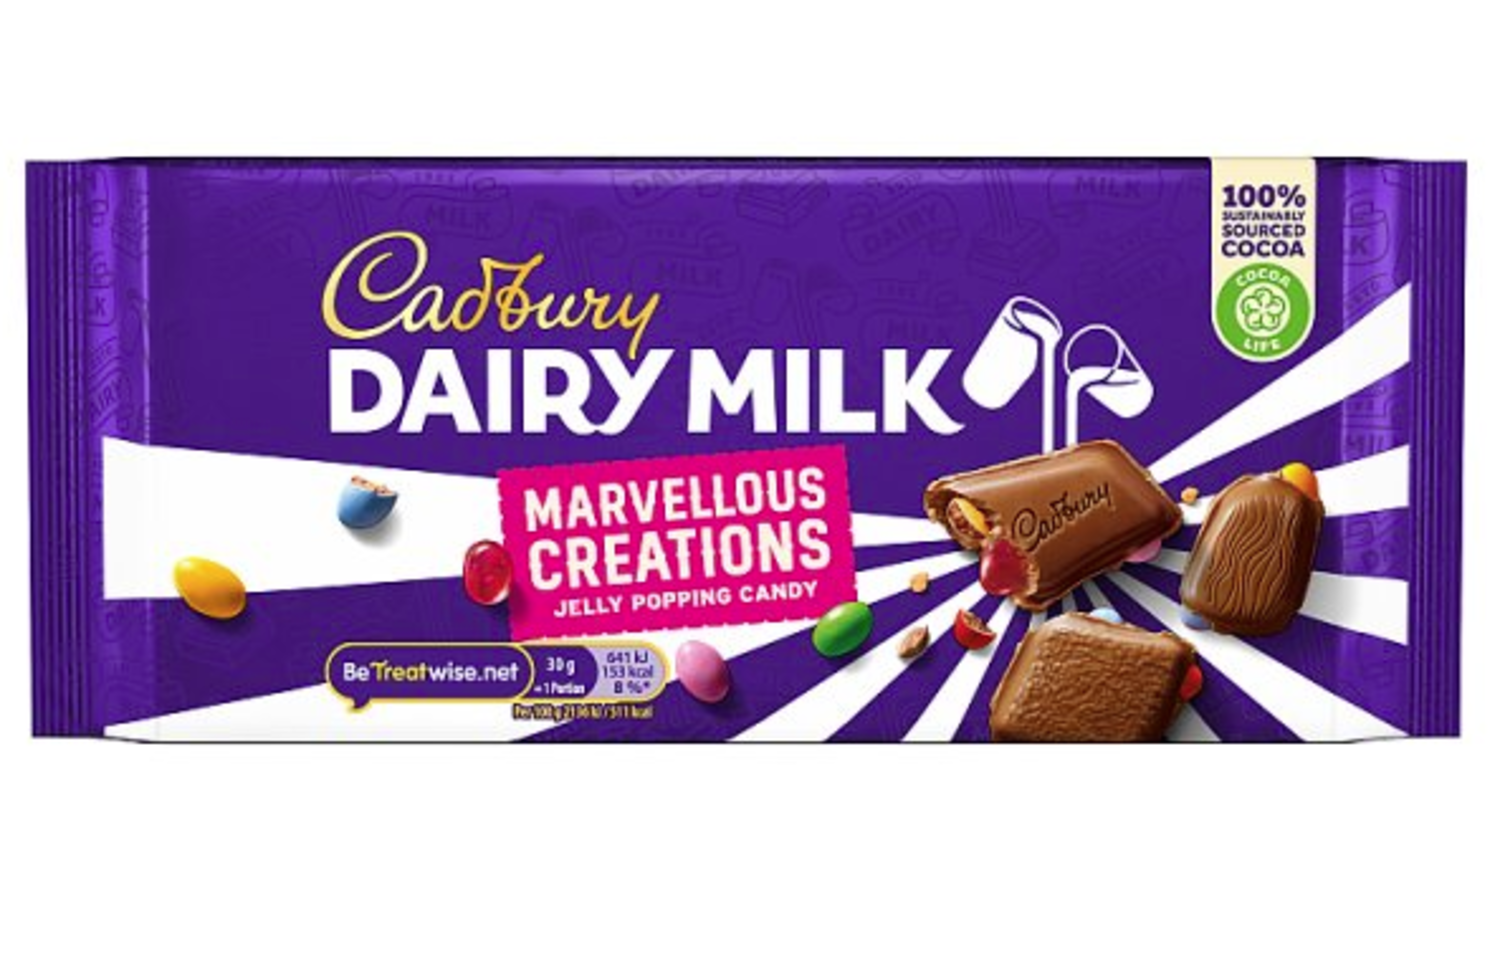 Cadbury Dairy Milk Marvellous Creations Jelly Popping Candy